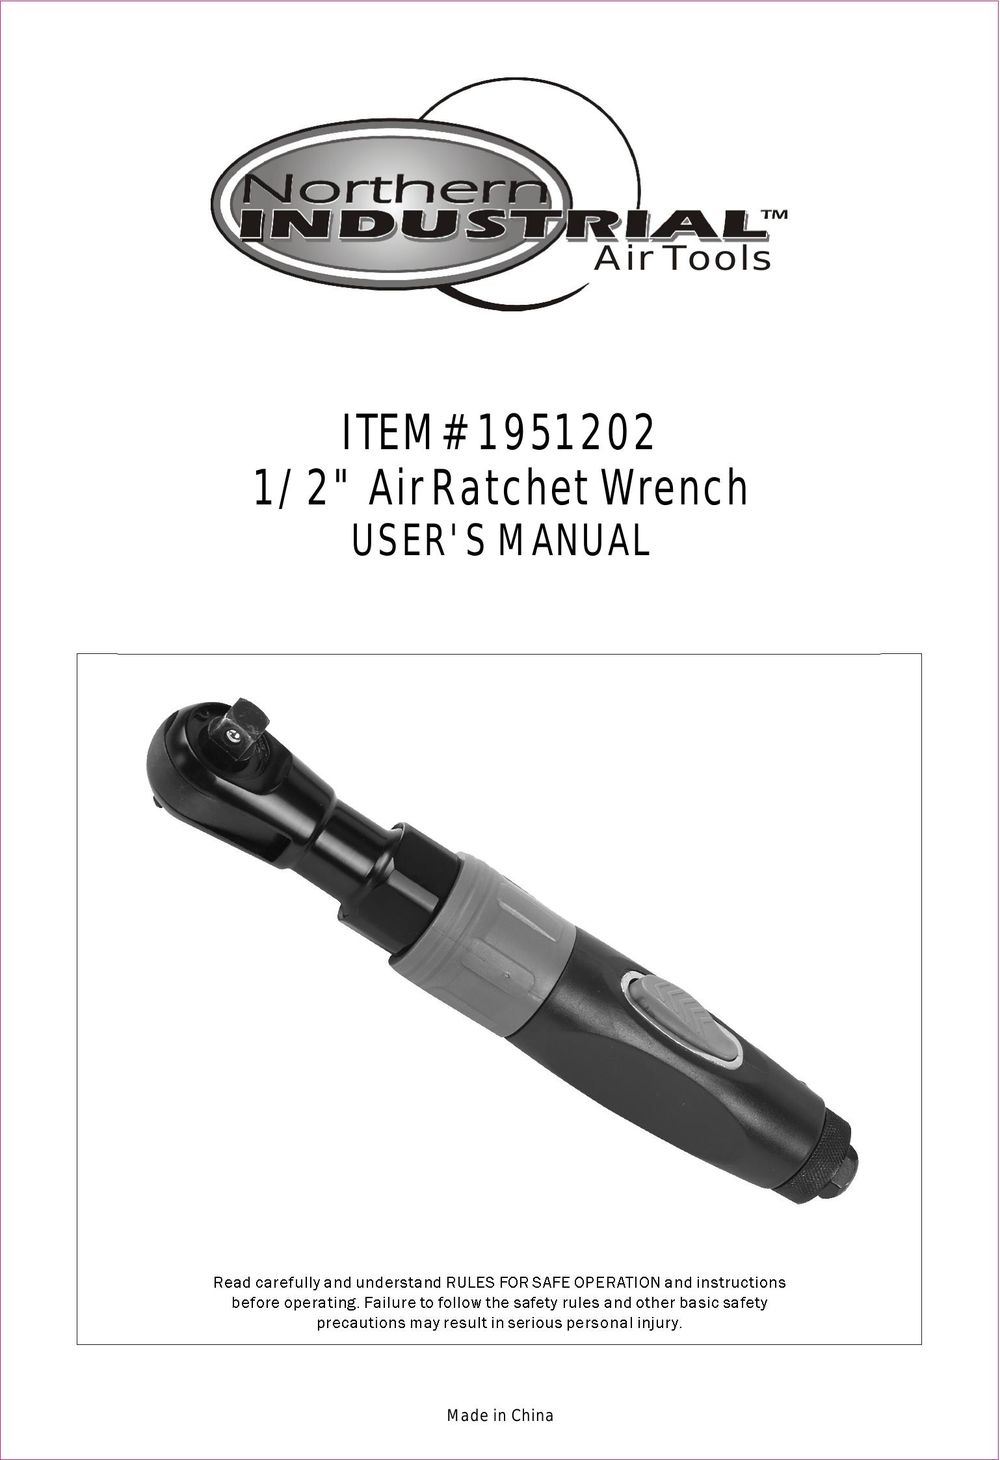 Northern Industrial Tools 1/2" AirRatchet Wrench Impact Driver User Manual